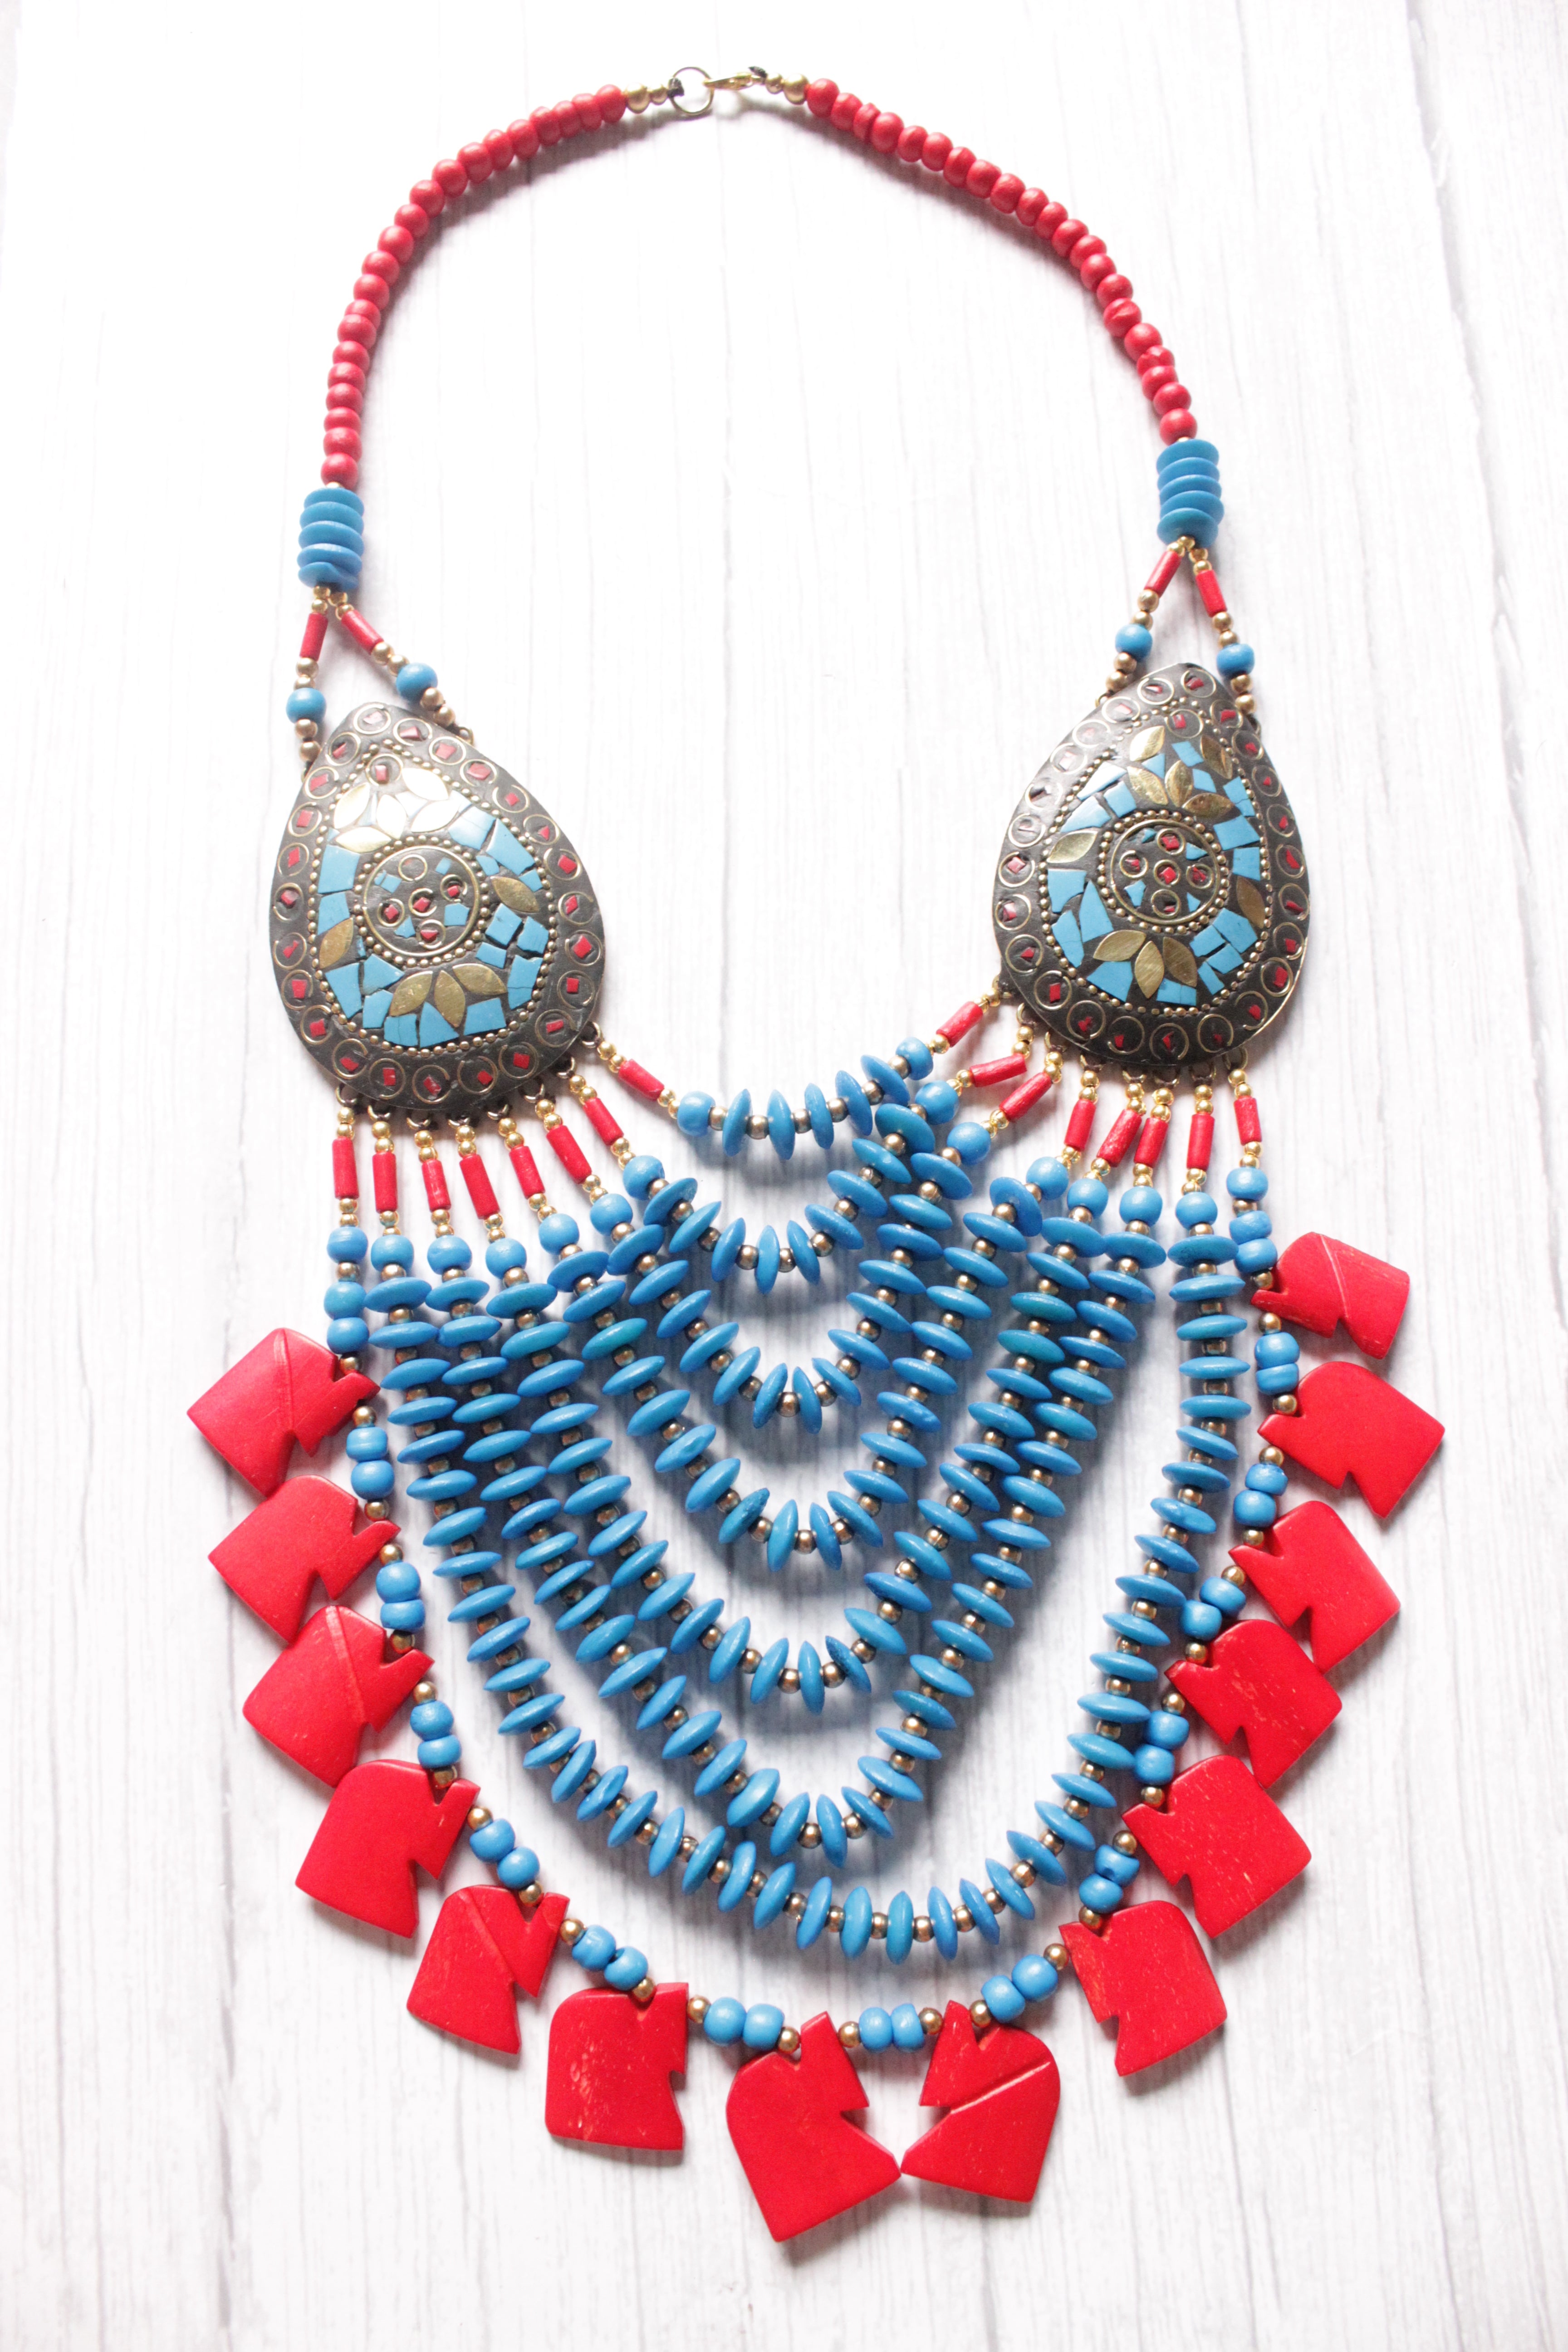 Sky Blue & Red Bone Beads Elephant Charms Tribal Motifs Handcrafted Statement African Tribal Necklace